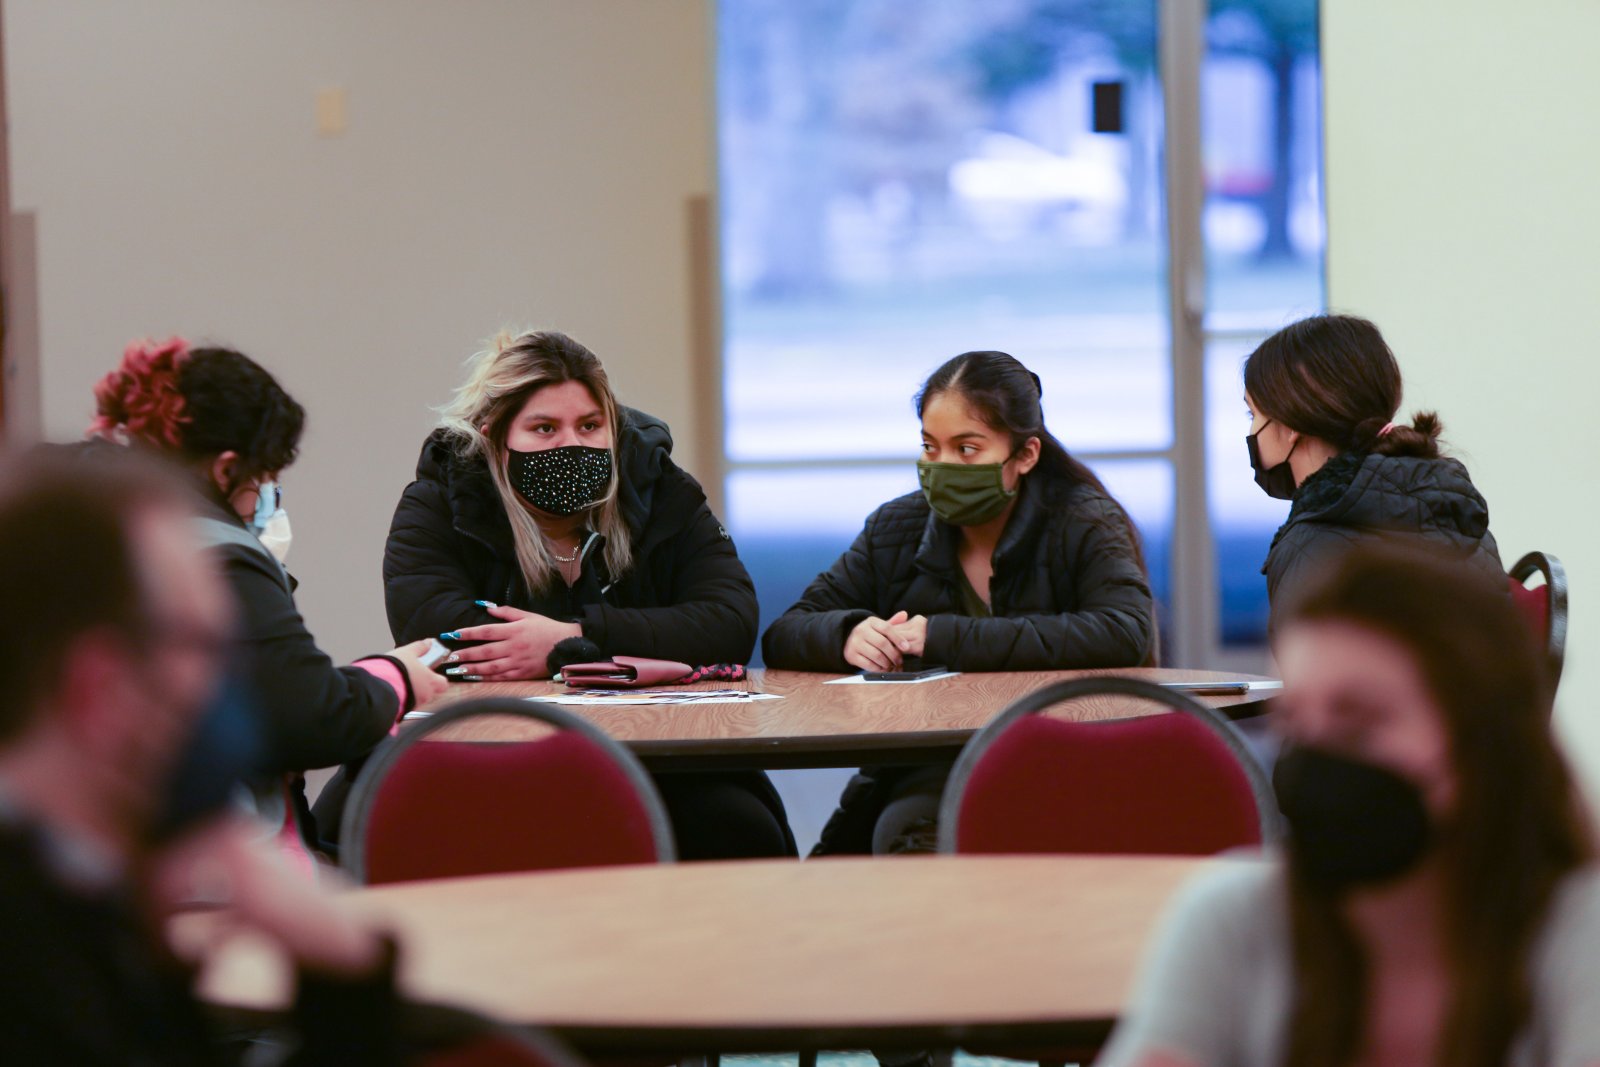 A group of students wear masks at a table during a workshop.